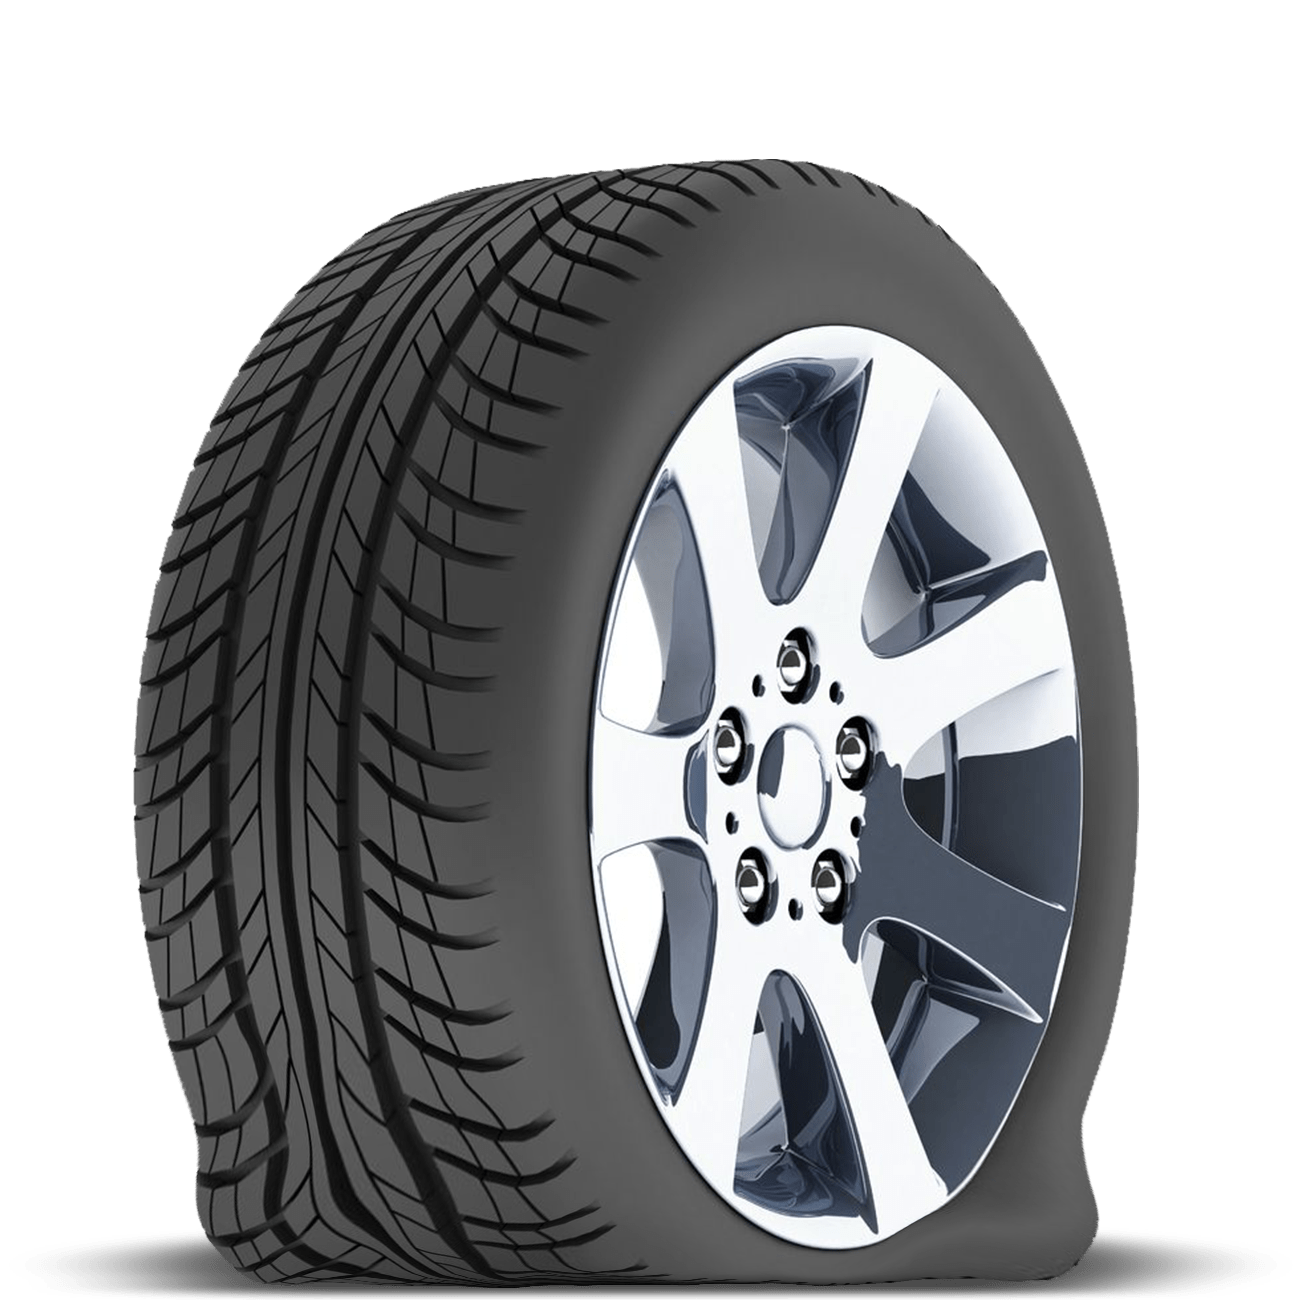 Wheel clipart tyre. Flat transparent png stickpng